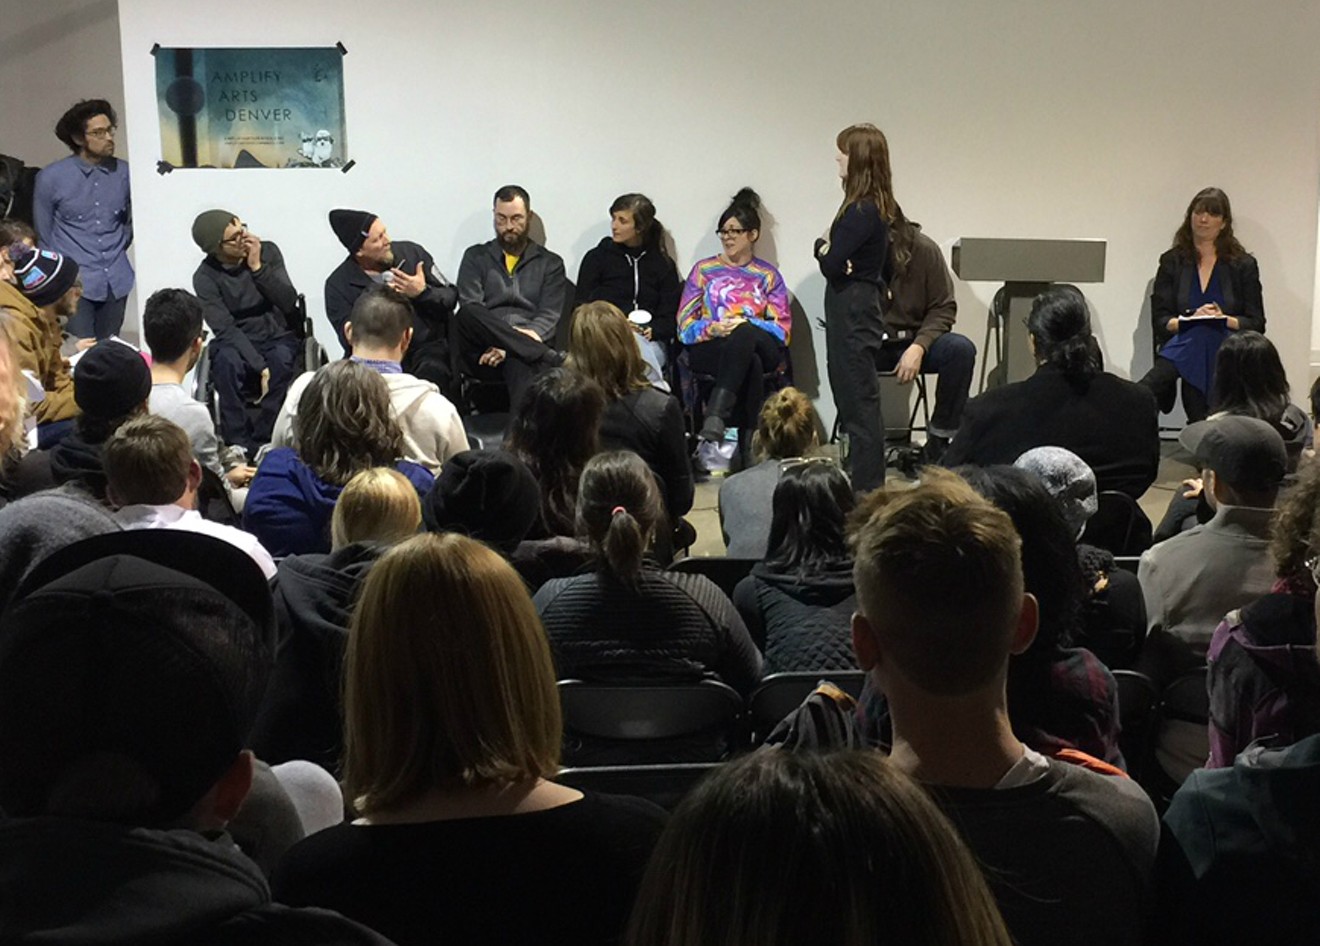 DIY artists and musicians gathered at RedLine to discuss the future of Denver's underground art scene.